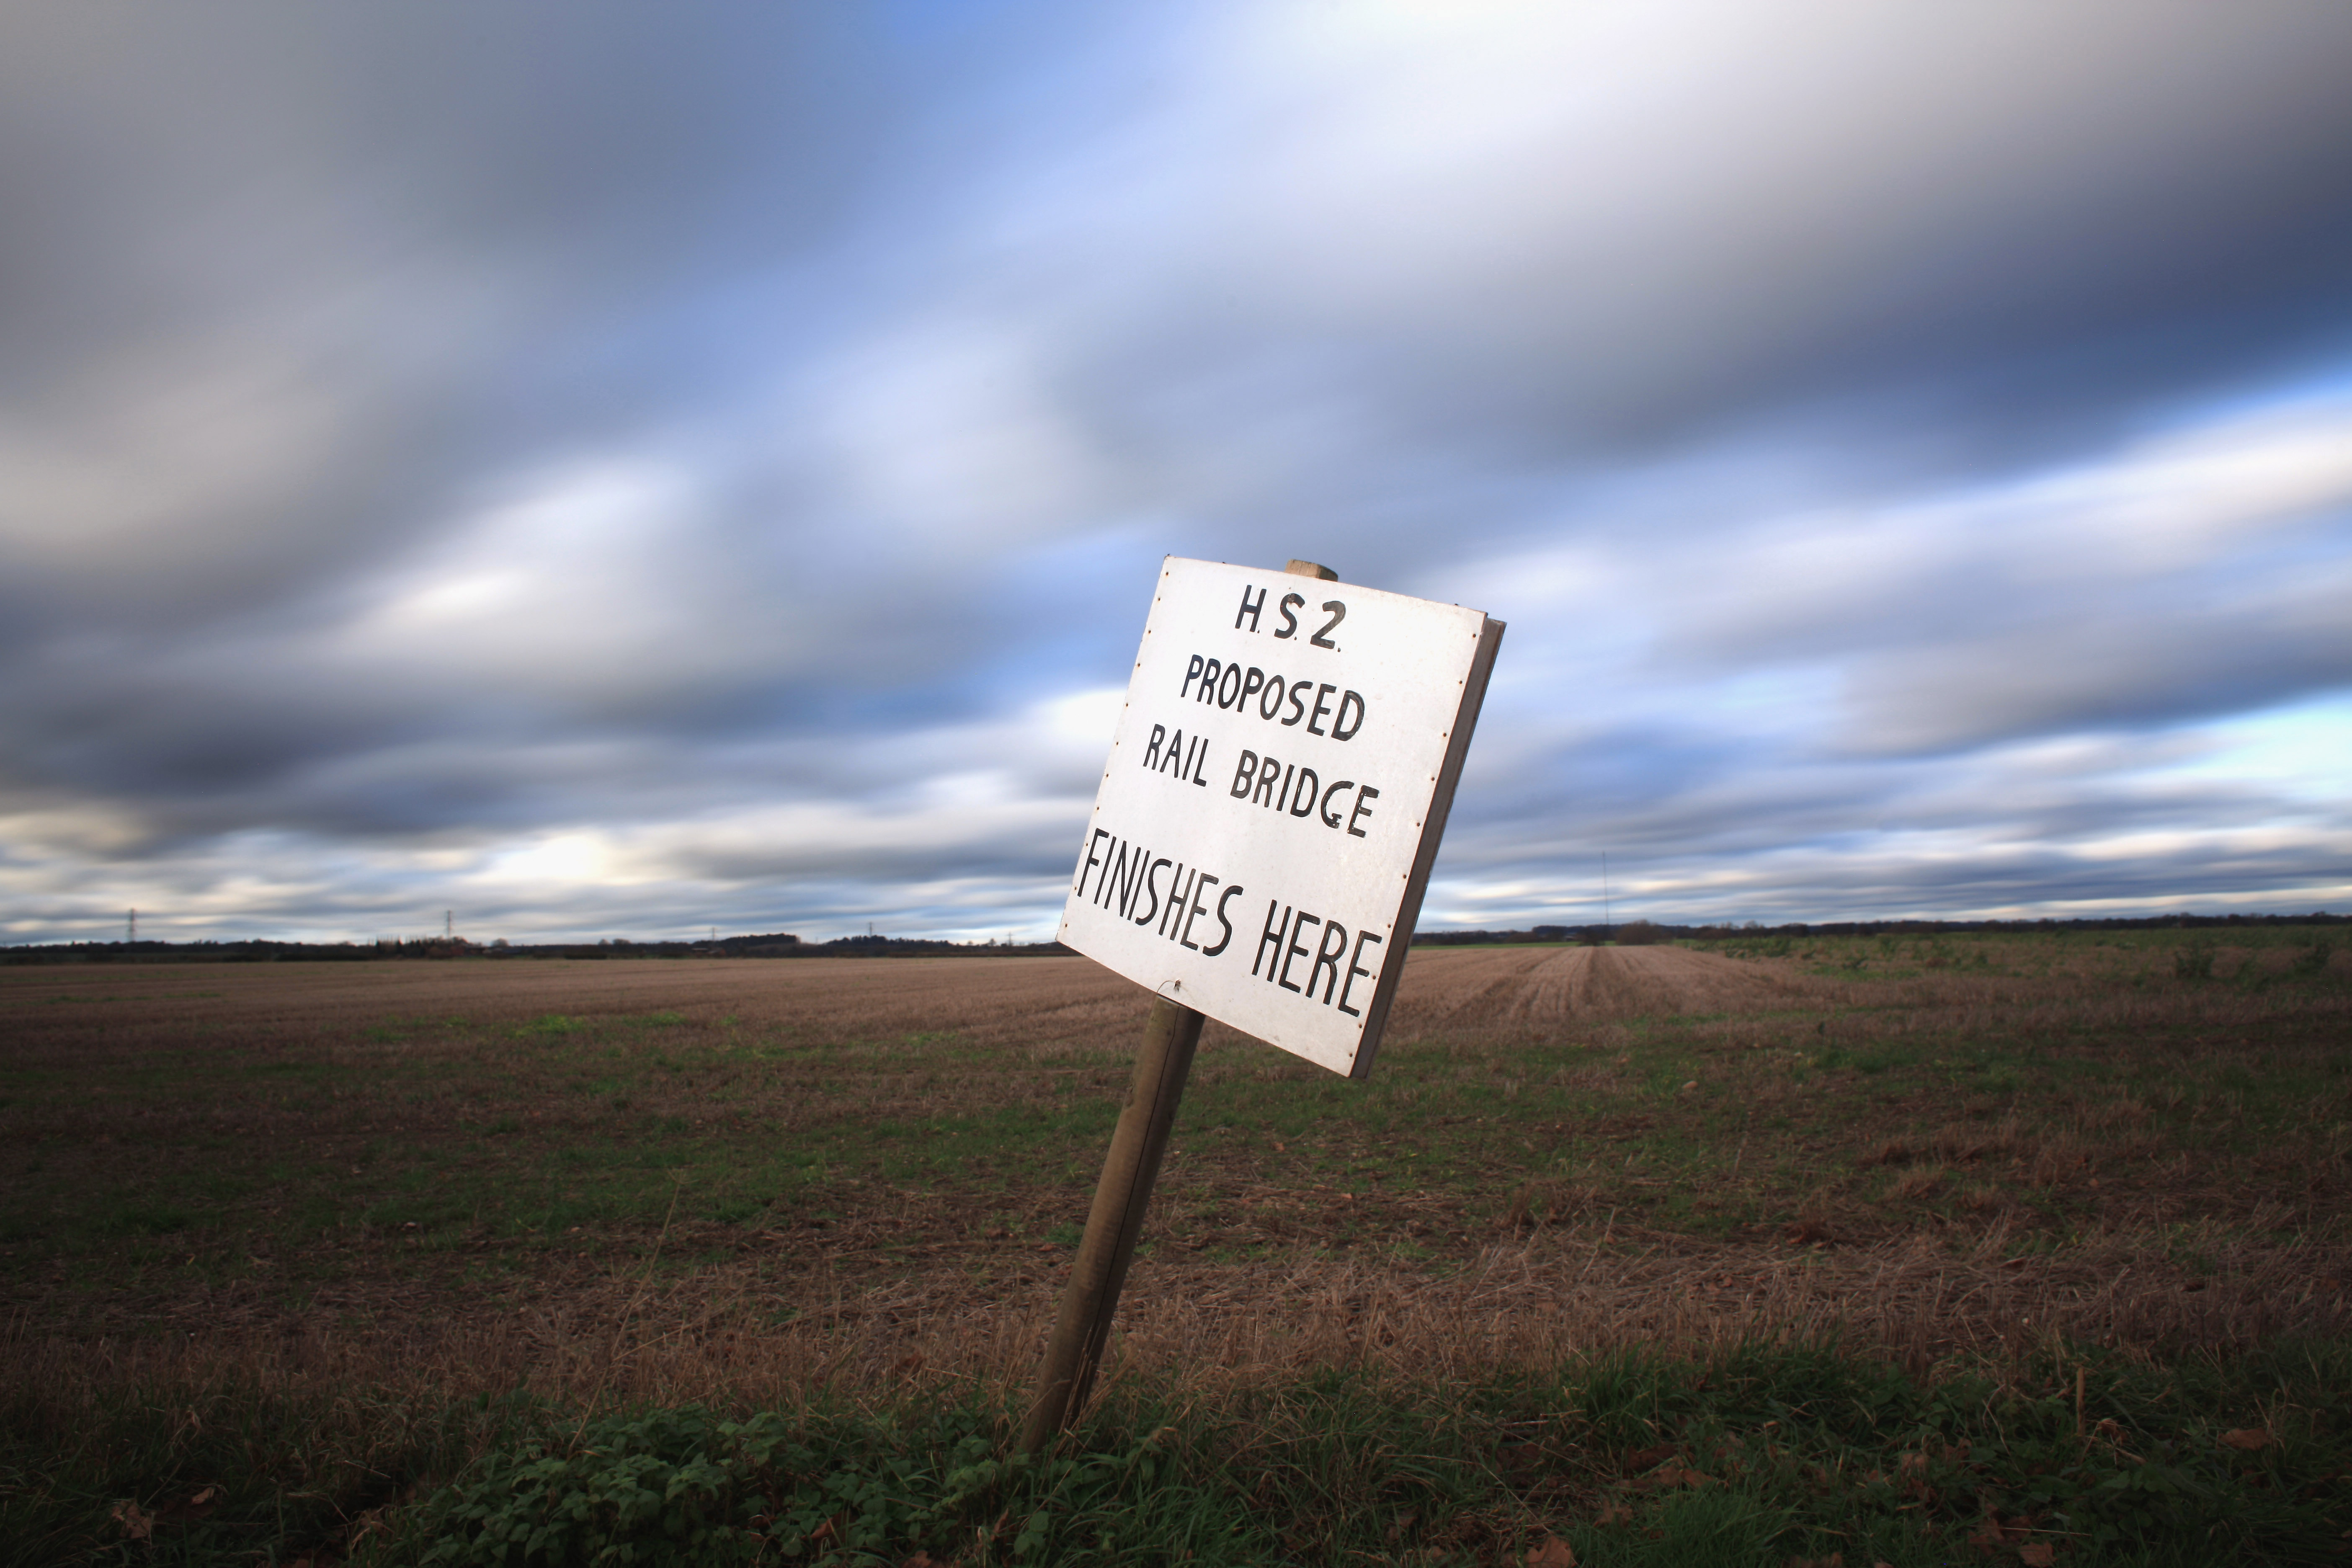 Critics argue HS2 will do damage to the British countryside